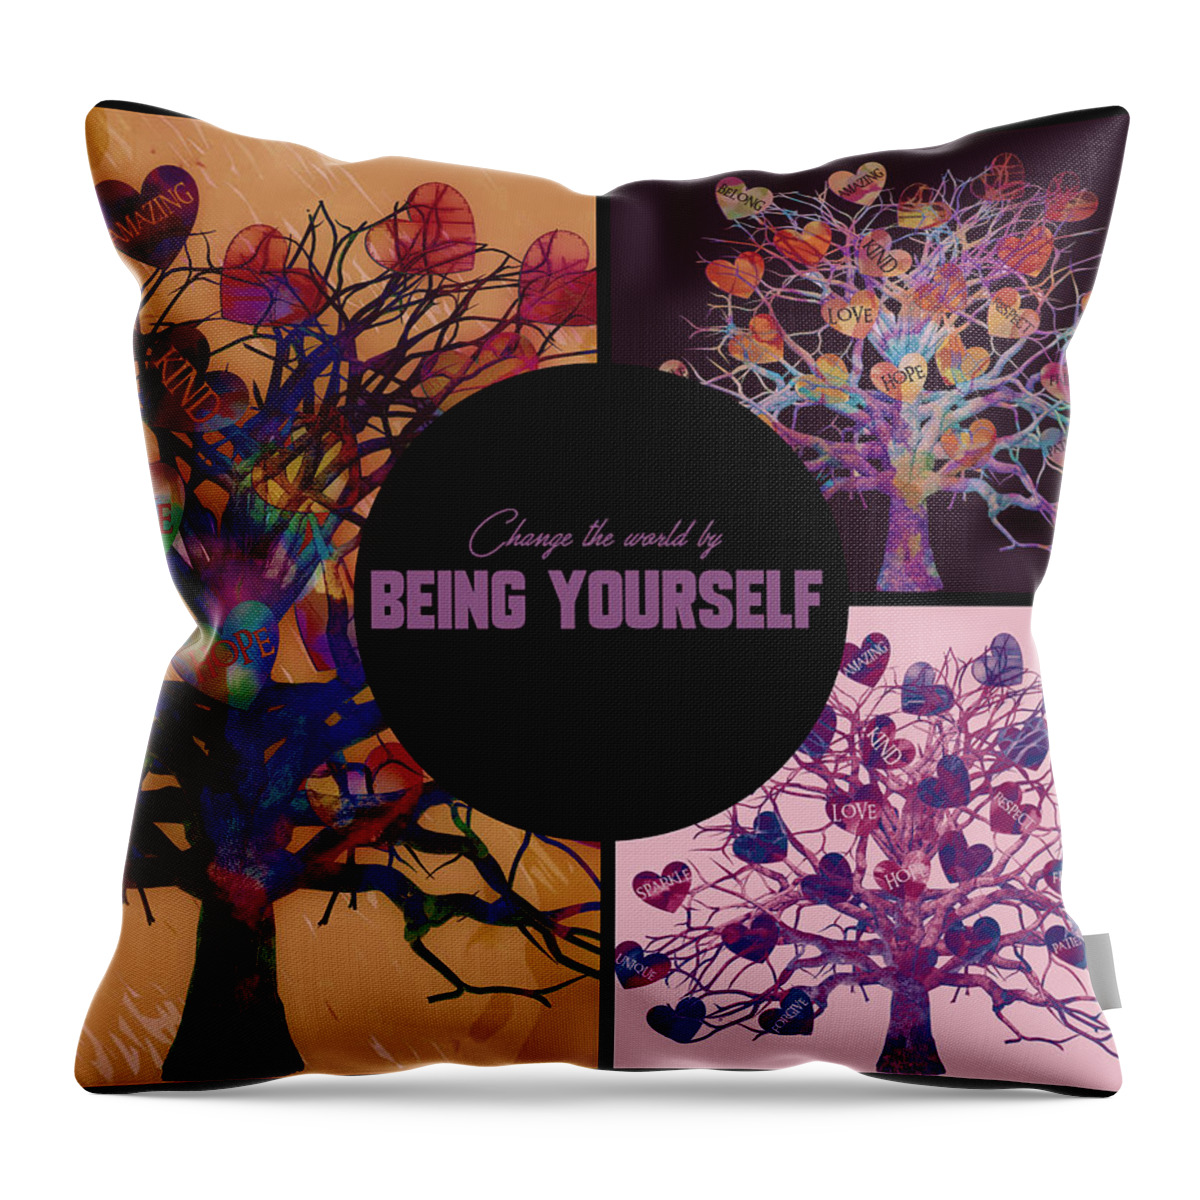 Self-esteem Throw Pillow featuring the digital art Change The World By Being Yourself by Michelle Liebenberg